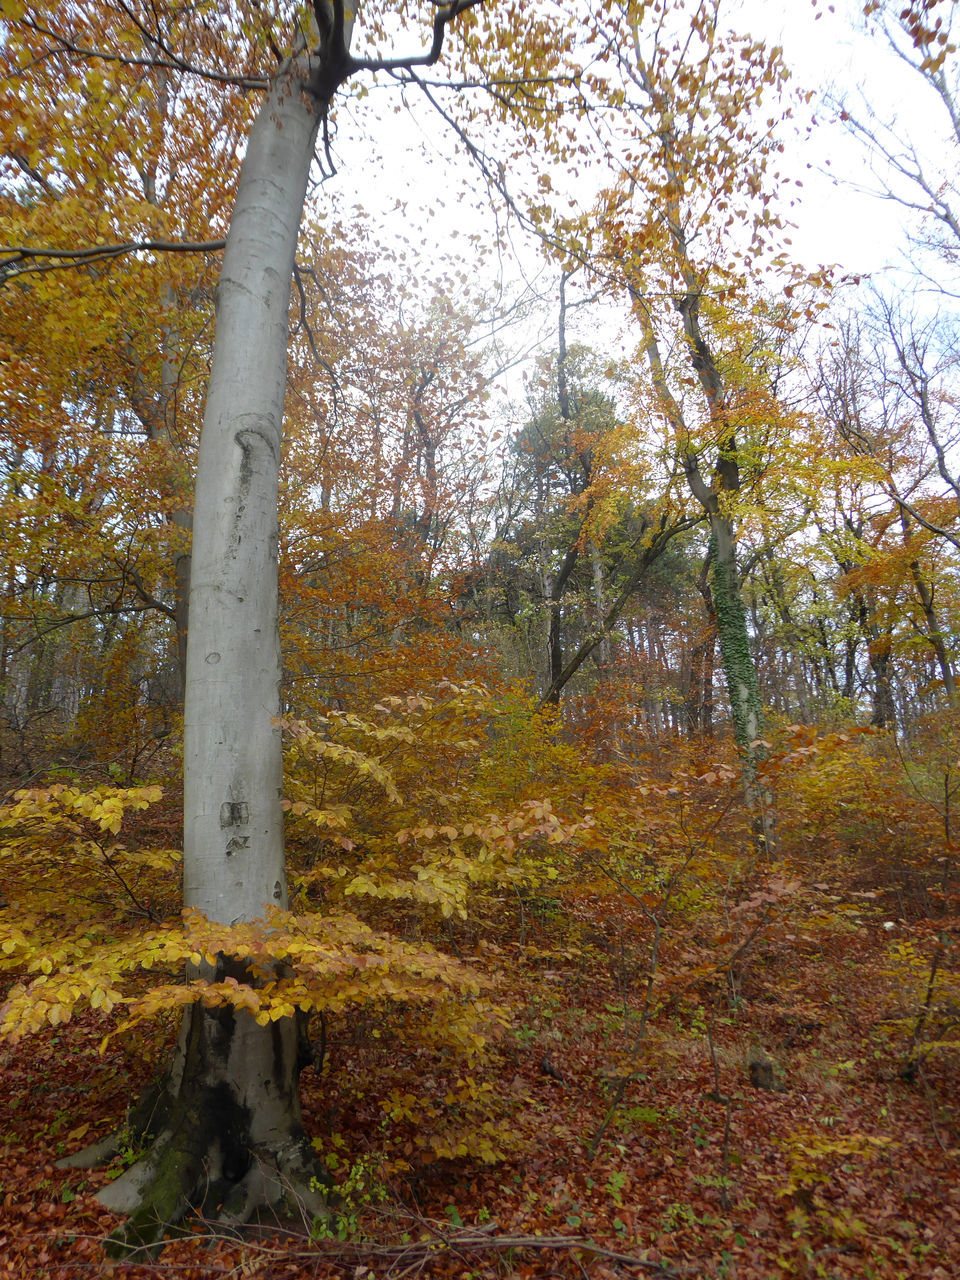 VIEW OF AUTUMNAL TREES